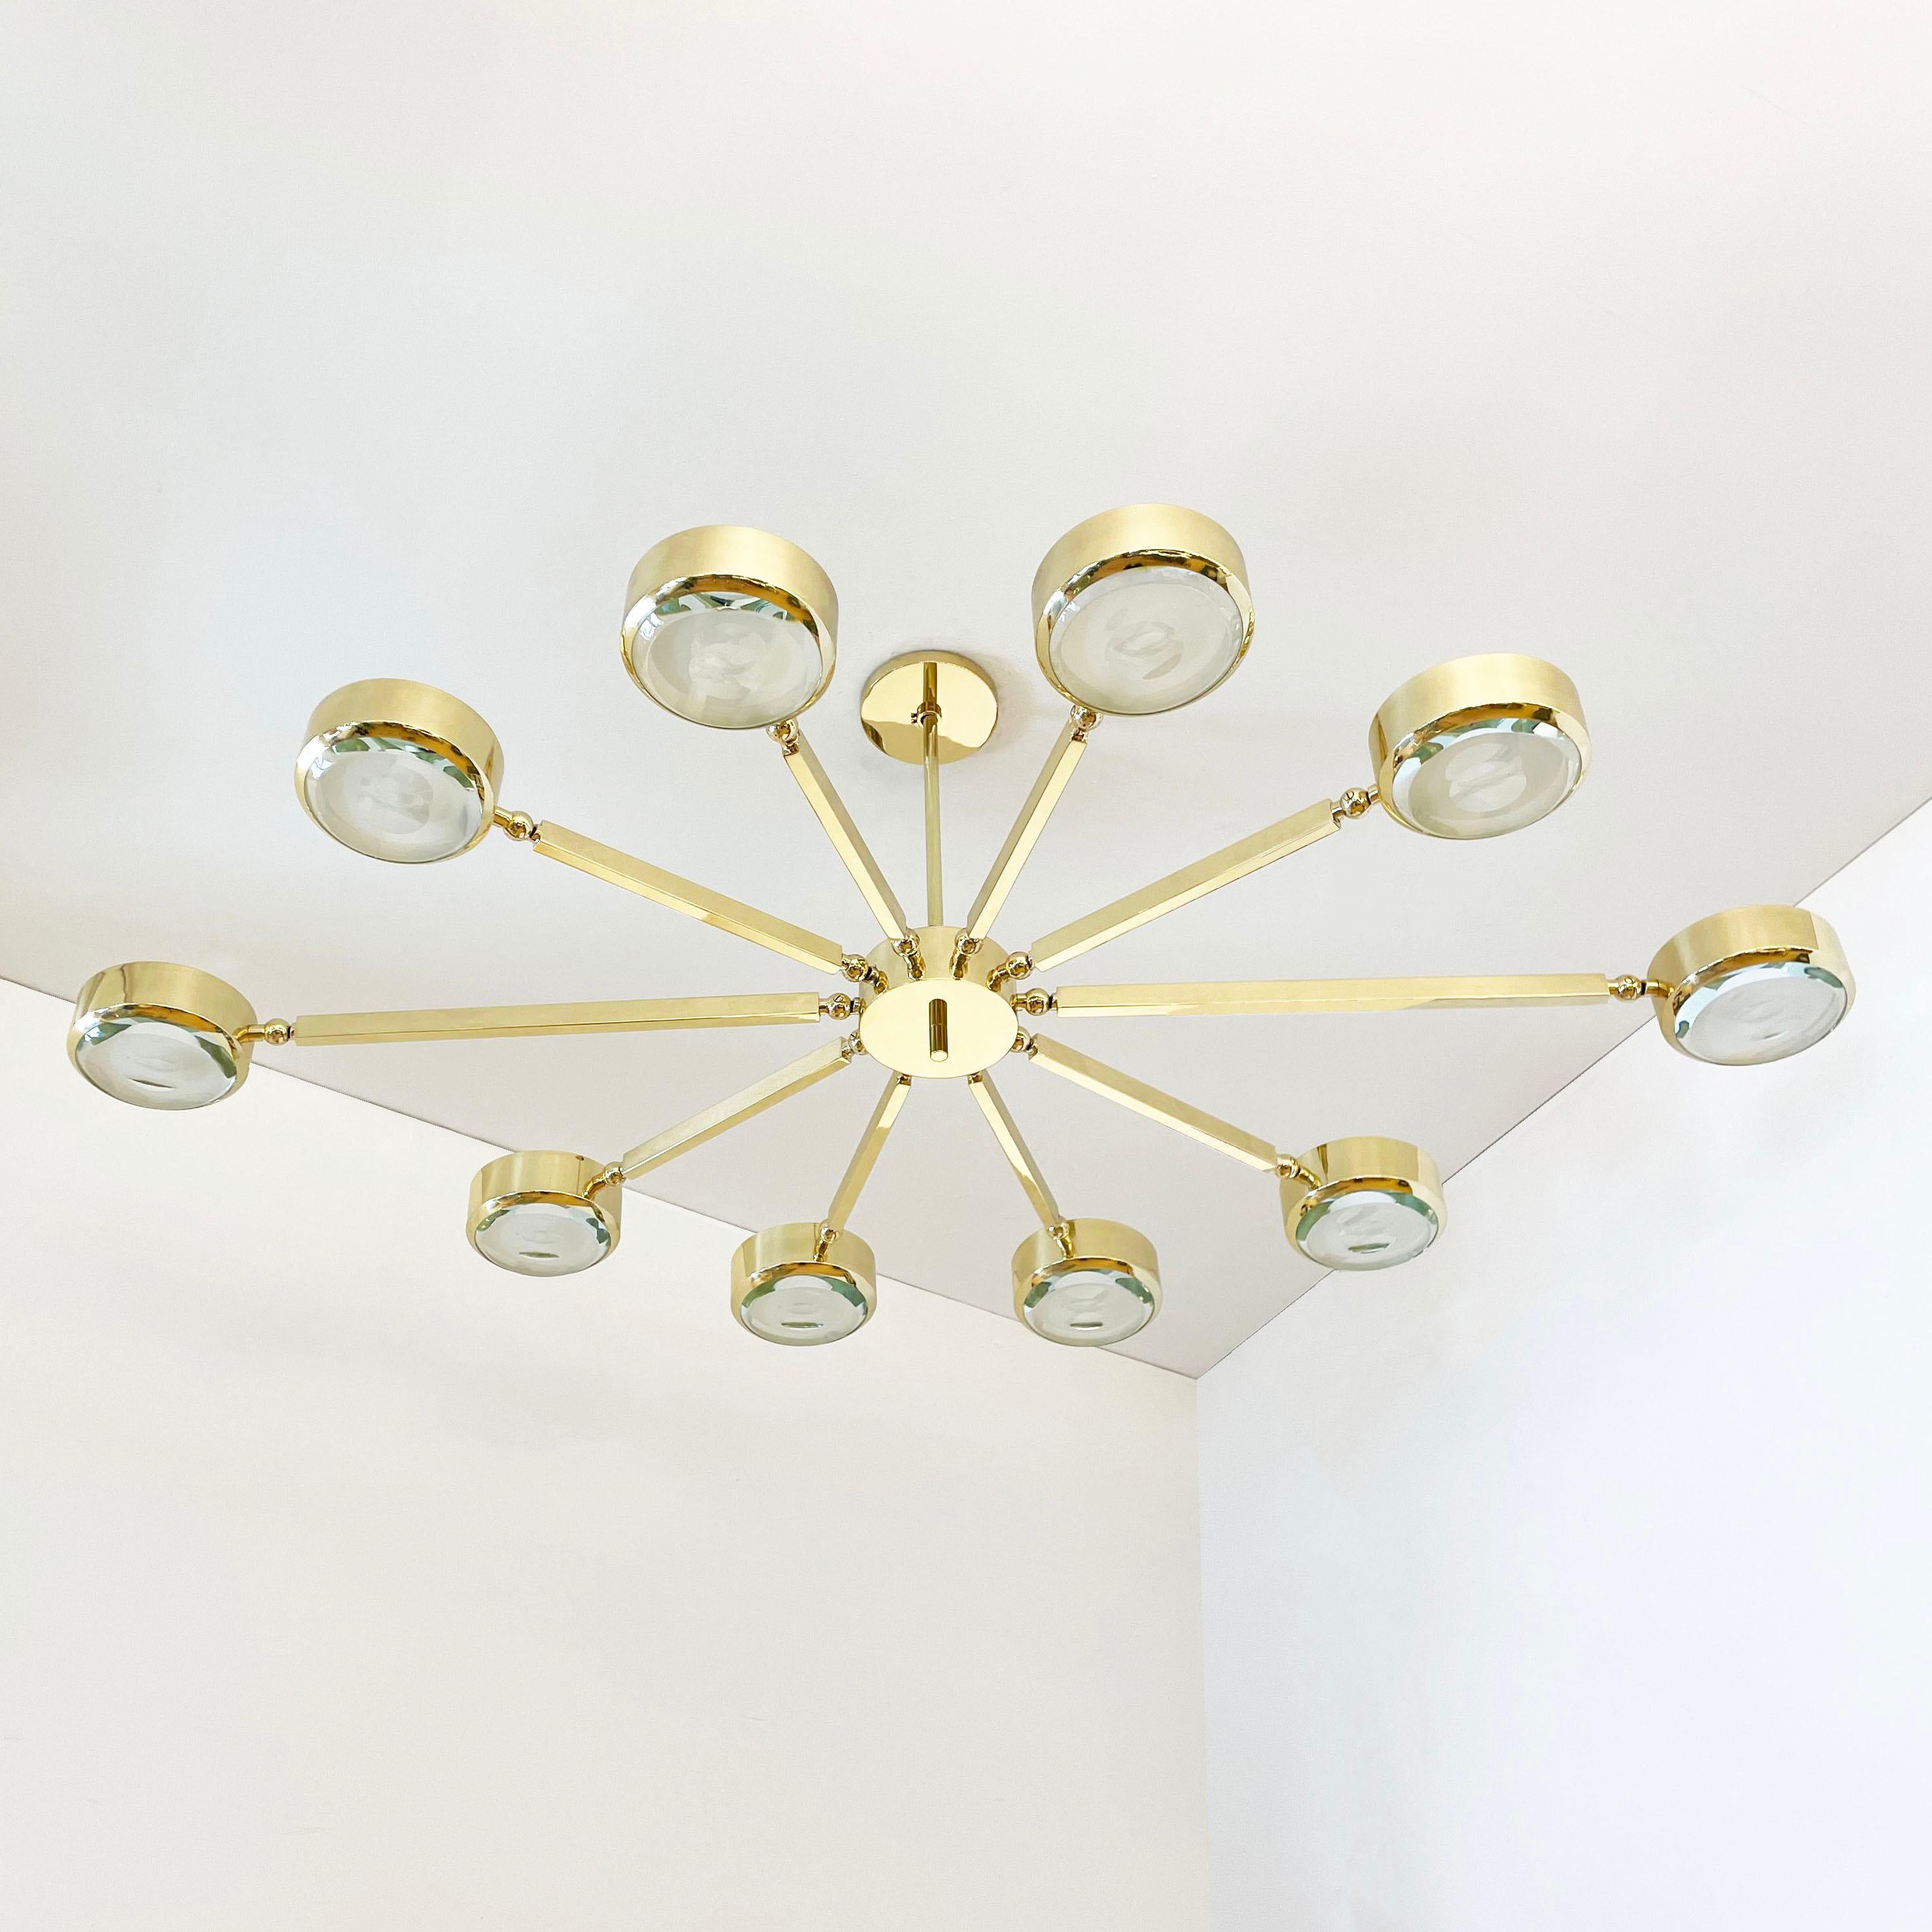 Oculus Oval Ceiling Light by Gaspare Asaro- Polished Nickel with Carved Glass For Sale 1